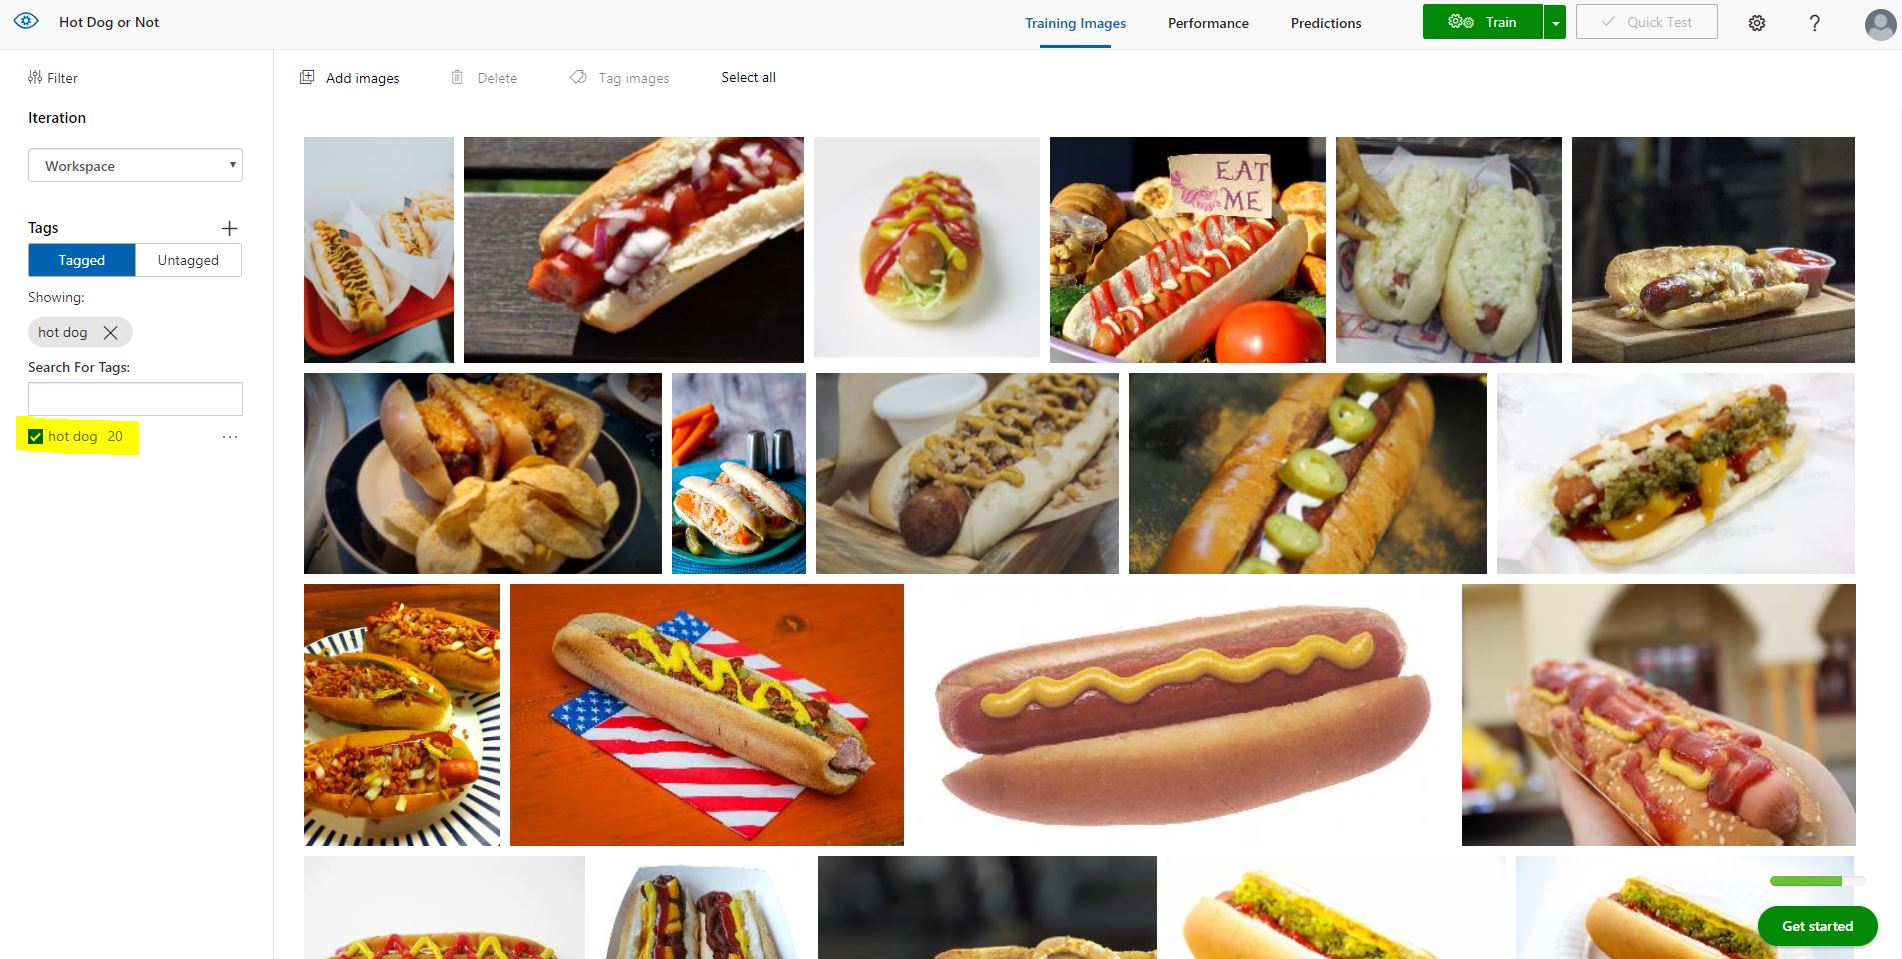 Hot Dogs available